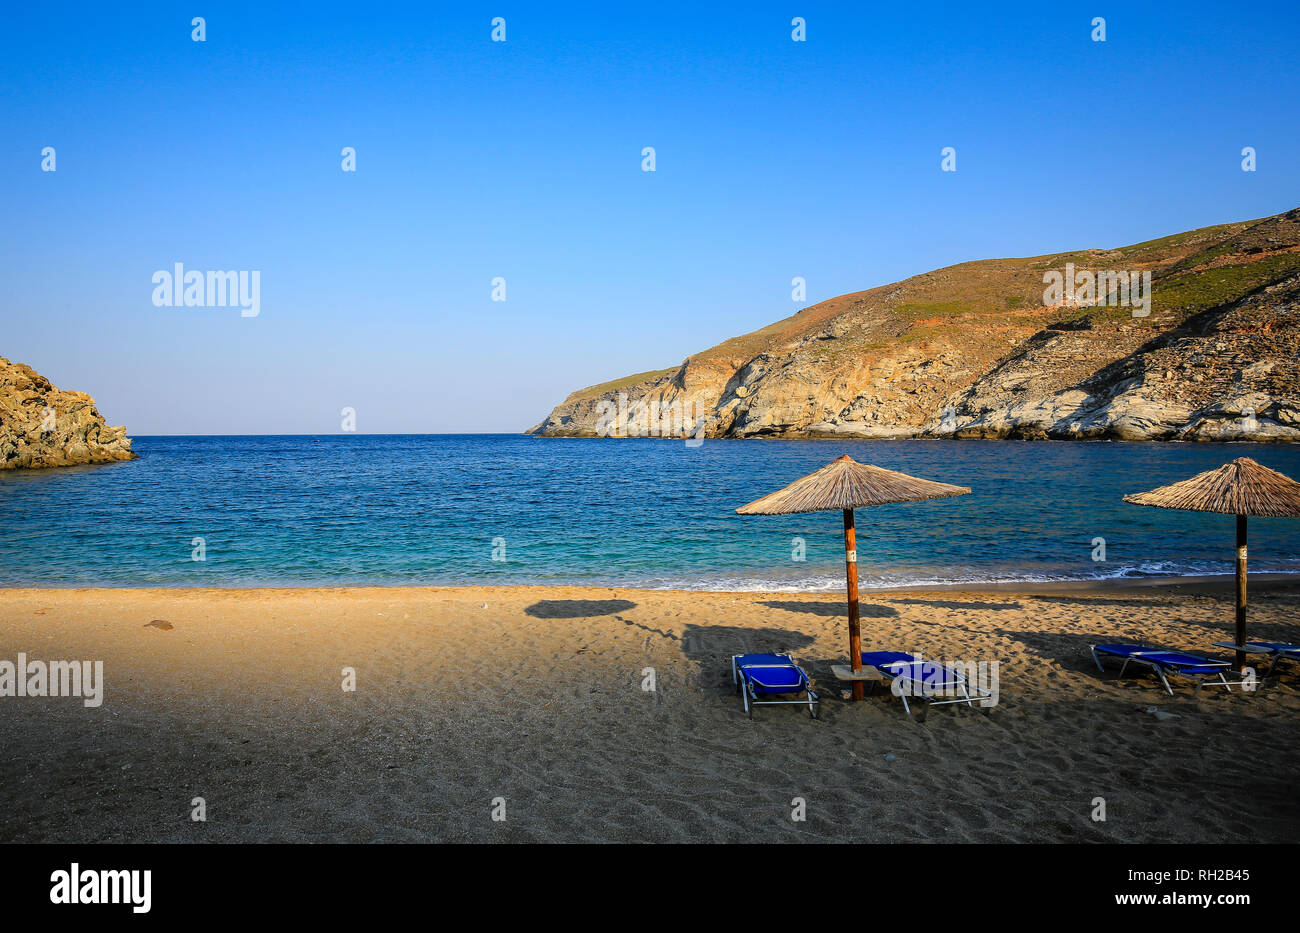 Island Andros, Cyclades, Greece - sunbeds and parasols on the beach Ormos Zorkou in the north of the island. Insel Andros, Kykladen, Griechenland - So Stock Photo